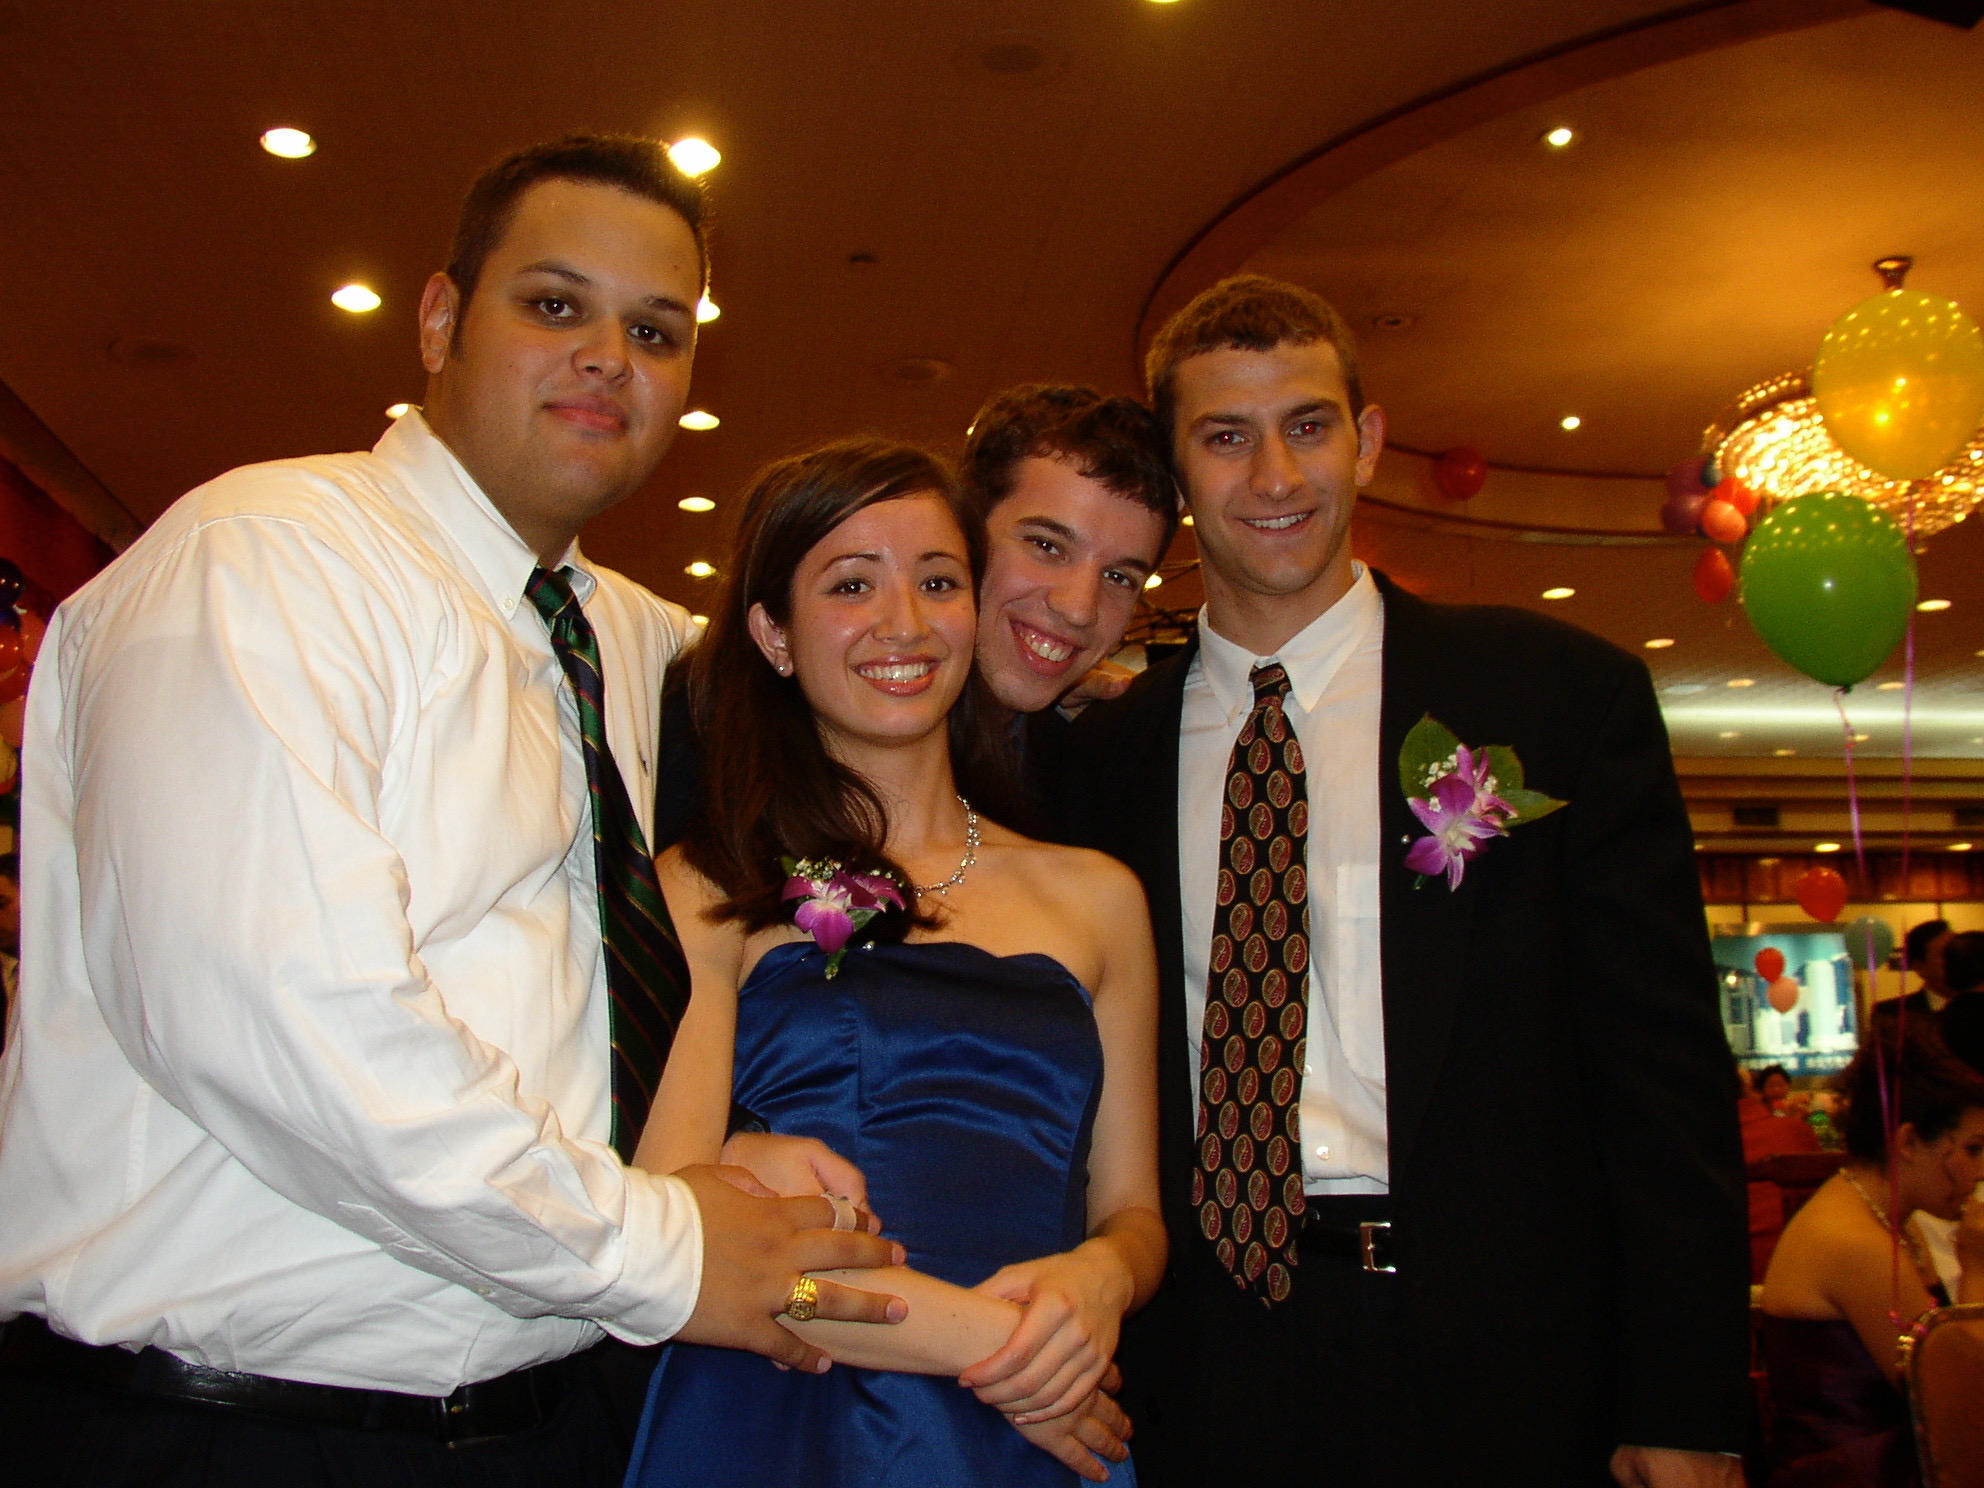 Four friends at a formal party